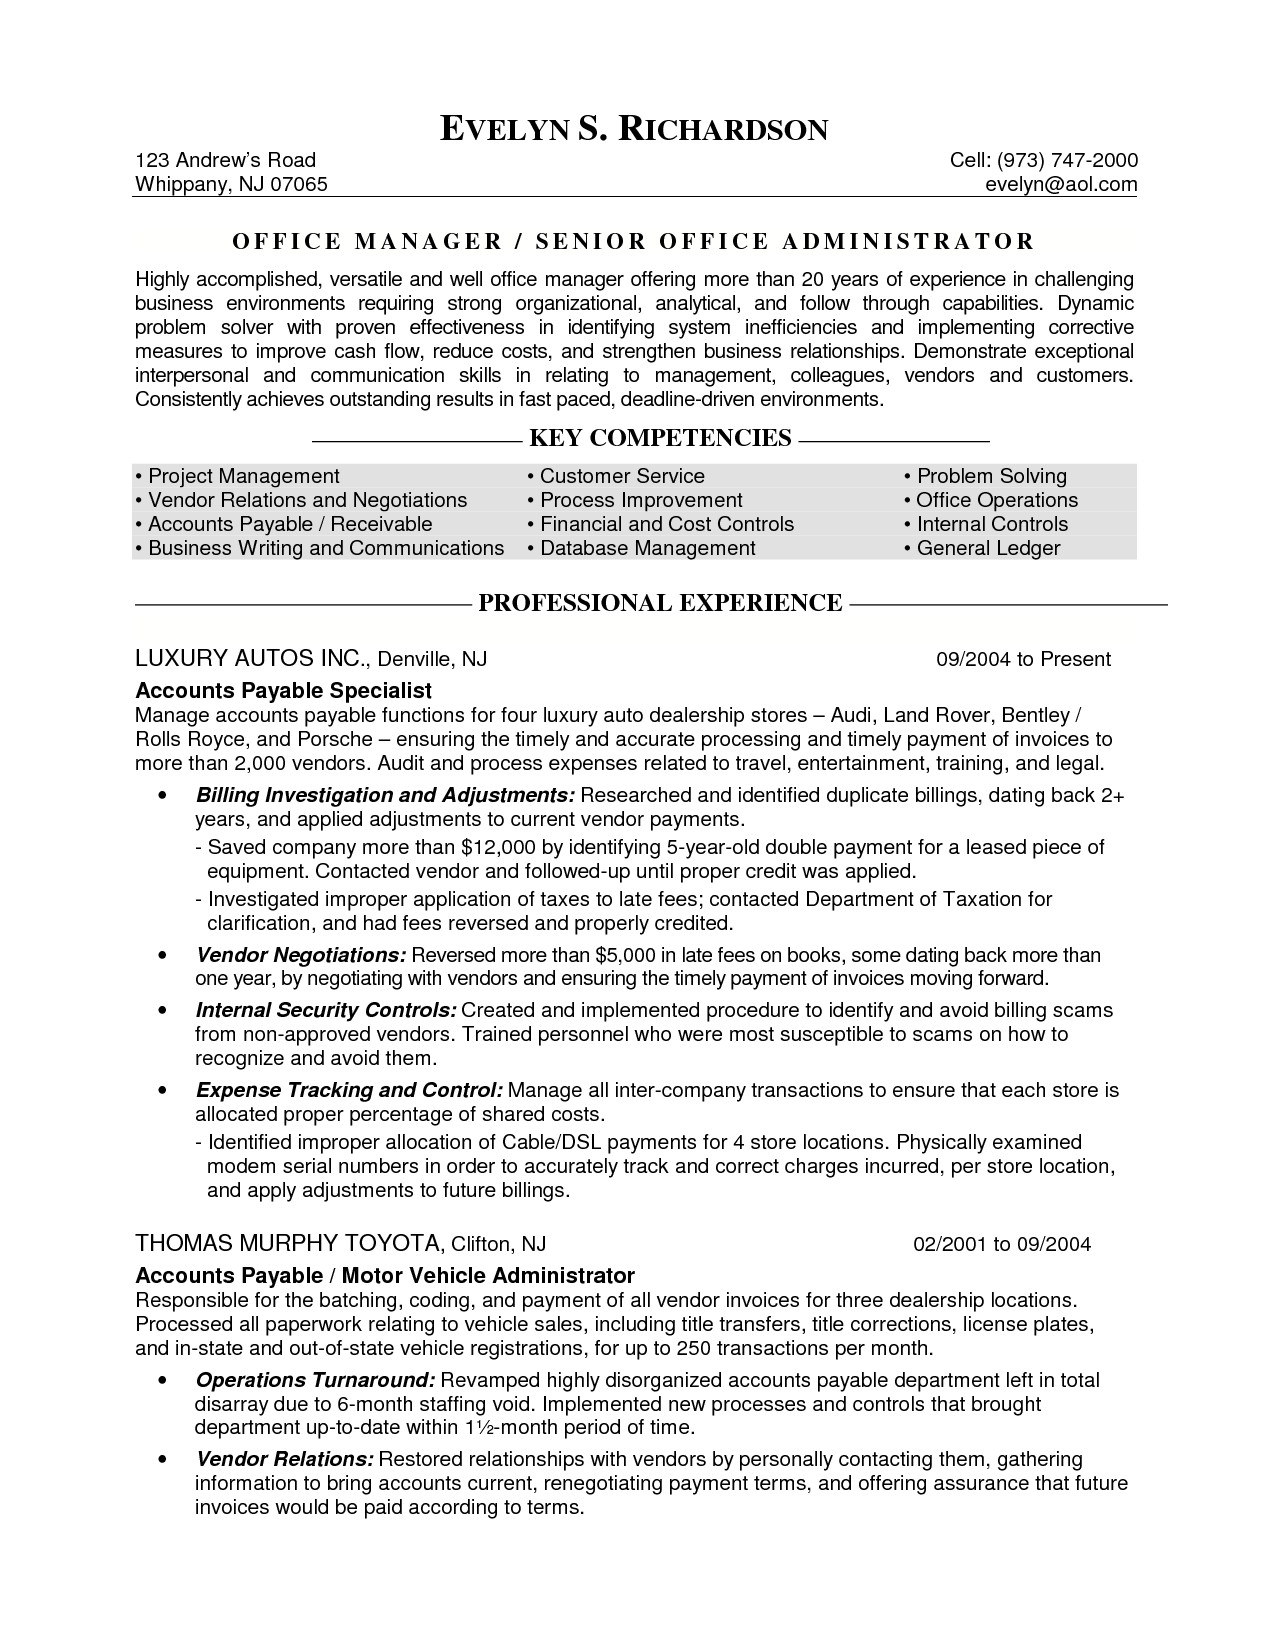 director of operations resume objectives